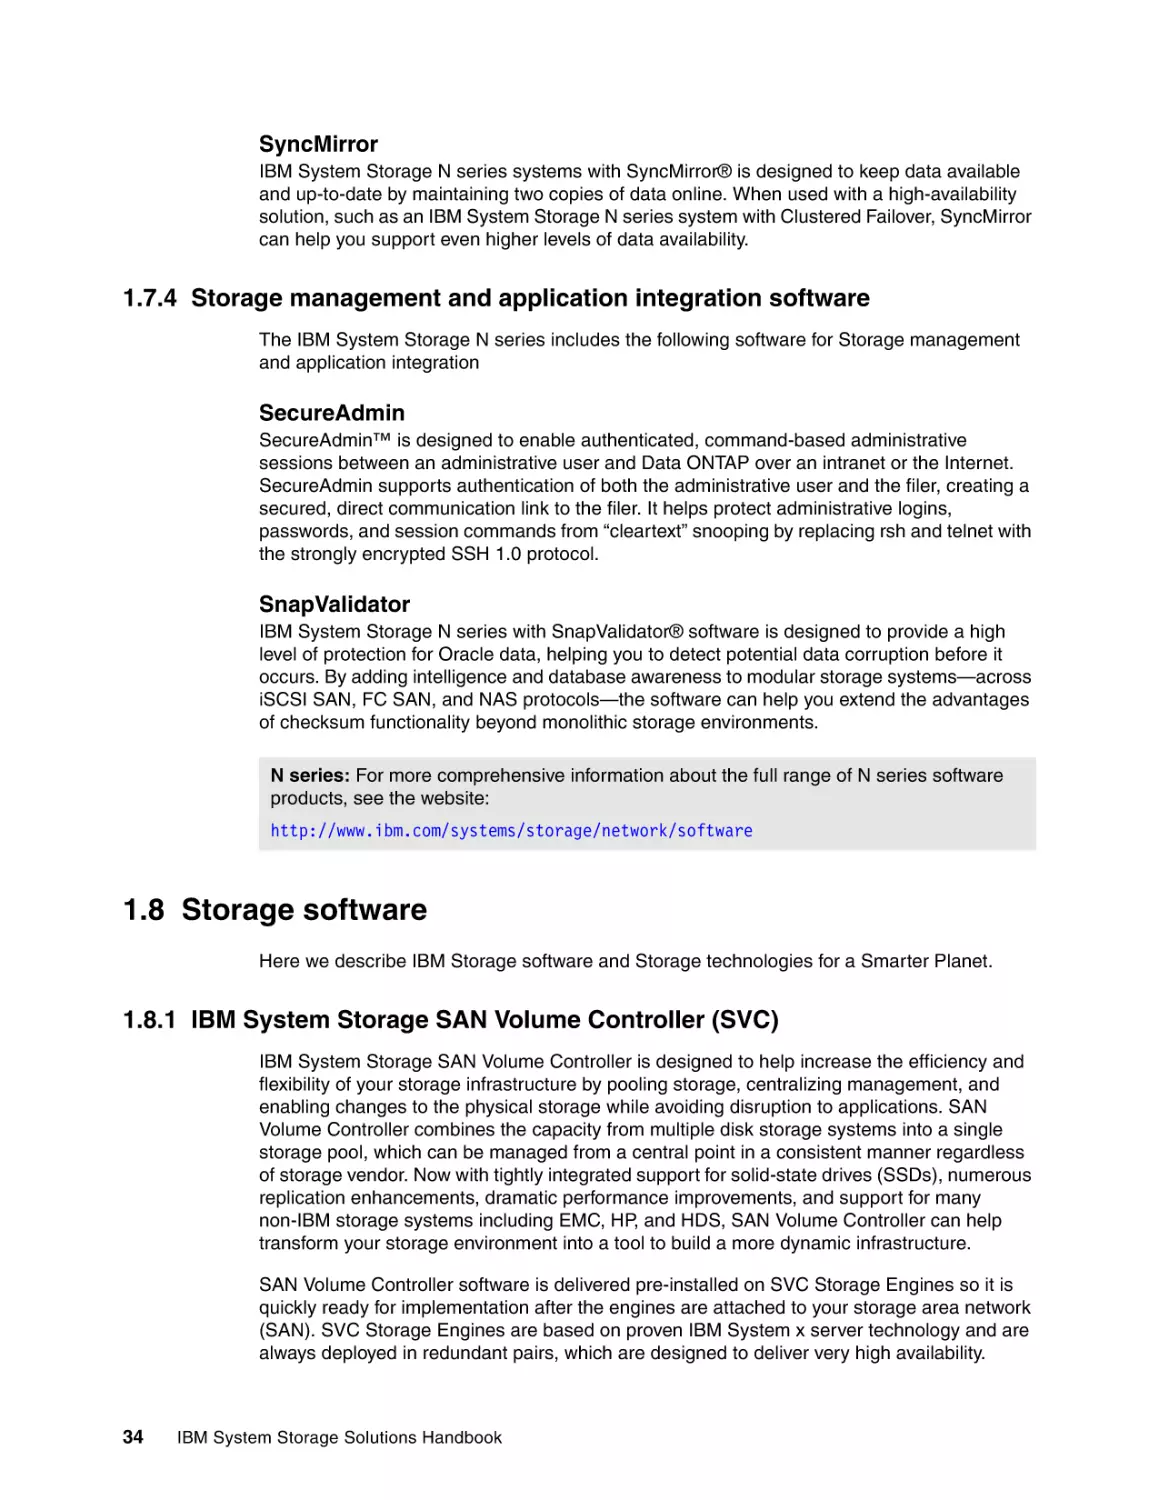 1.7.4 Storage management and application integration software
1.8 Storage software
1.8.1 IBM System Storage SAN Volume Controller (SVC)